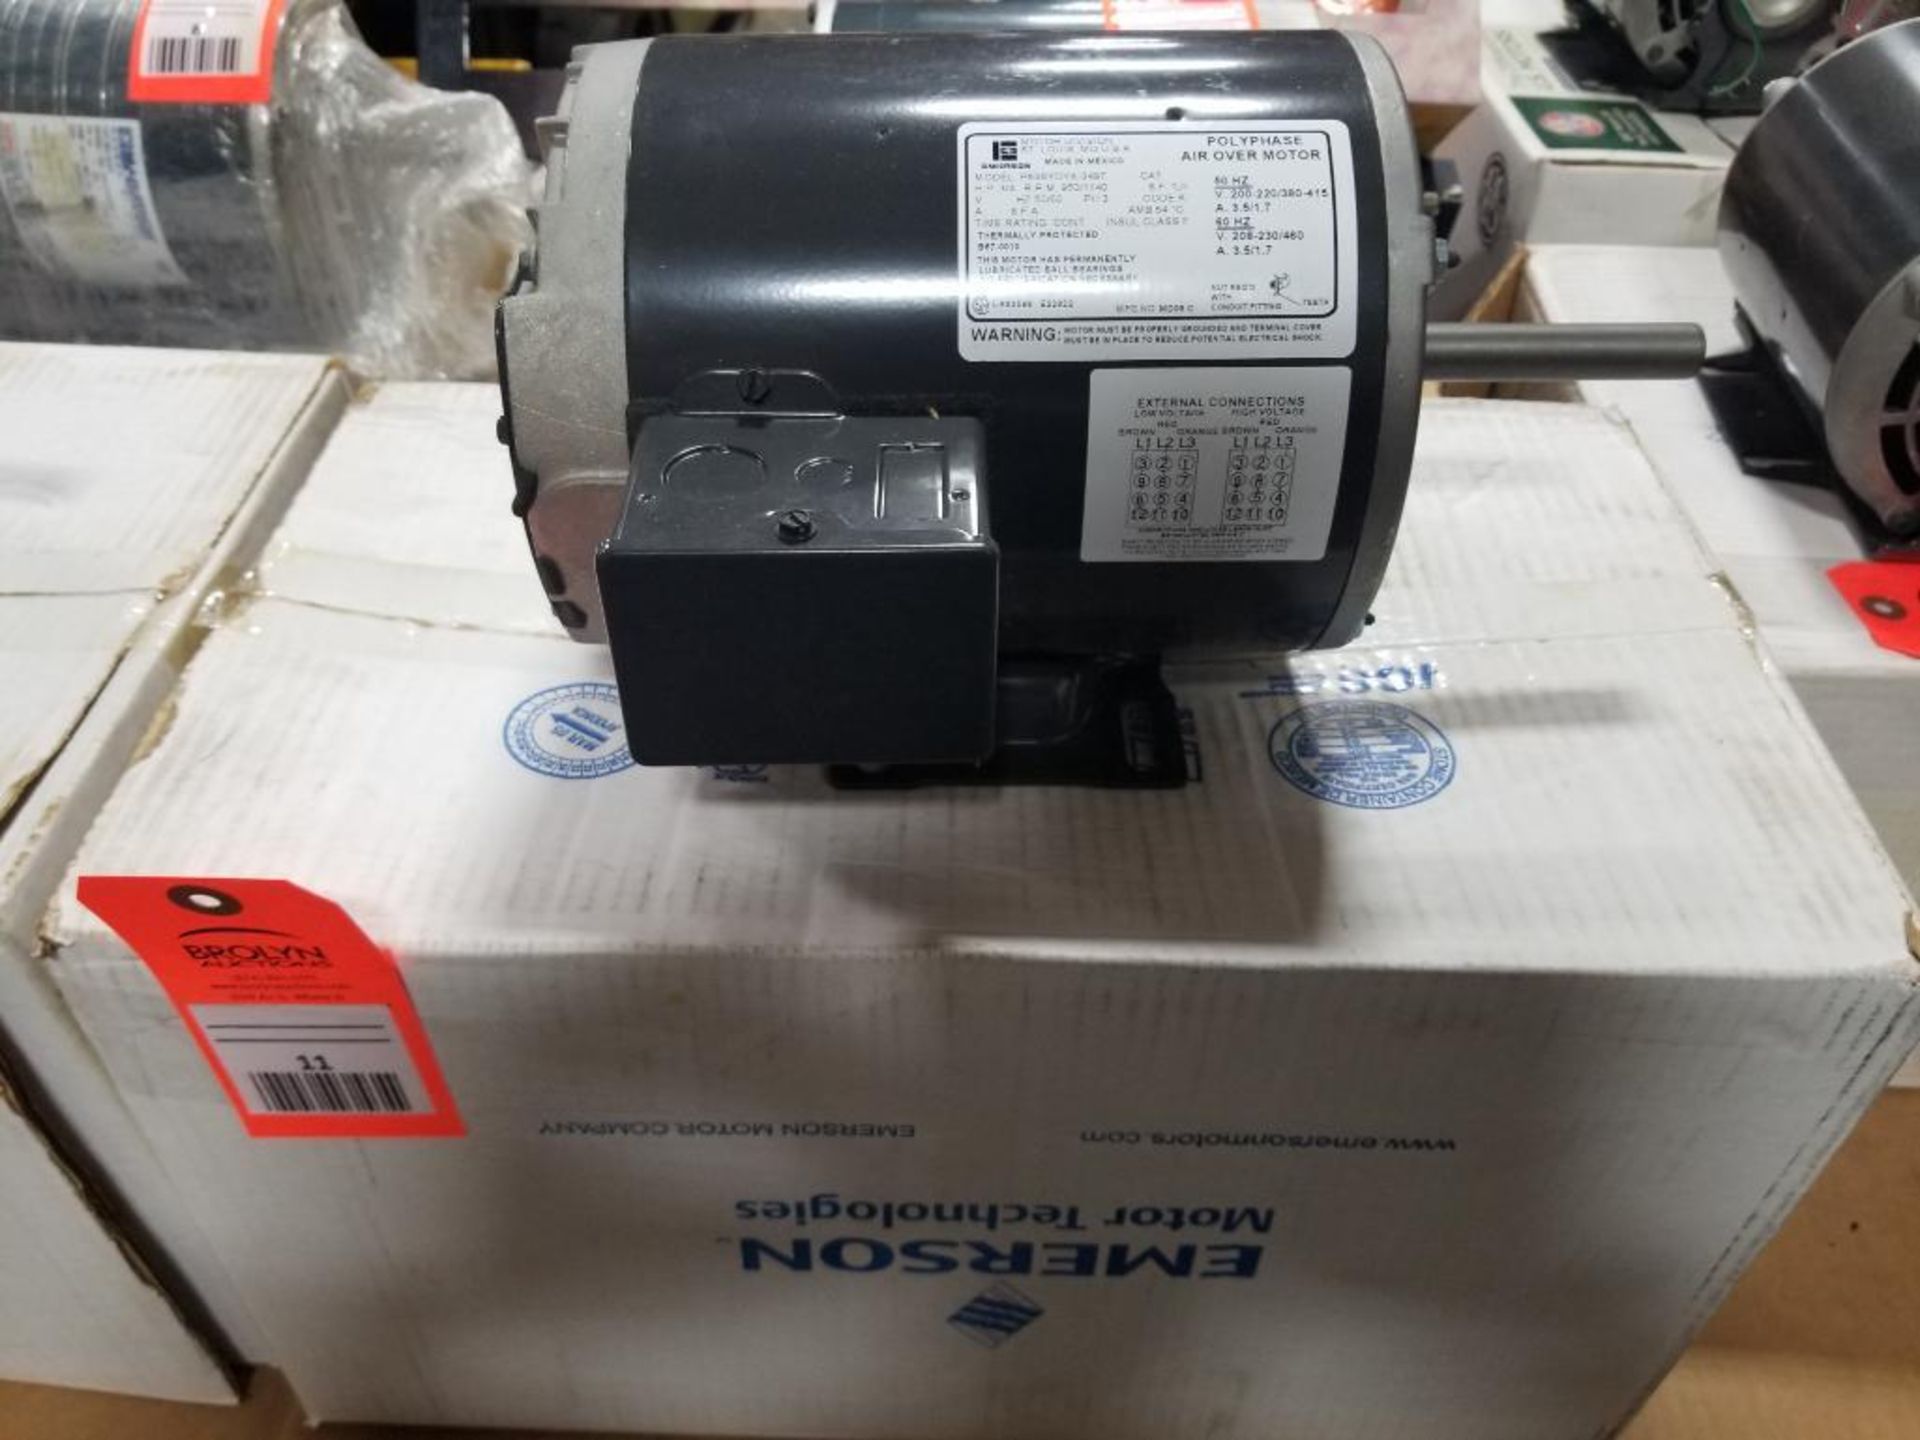 3/4HP Emerson P63SYDYK-3497 Polyphase air over motor. 3PH, 208-230/460V, 1140RPM. New.